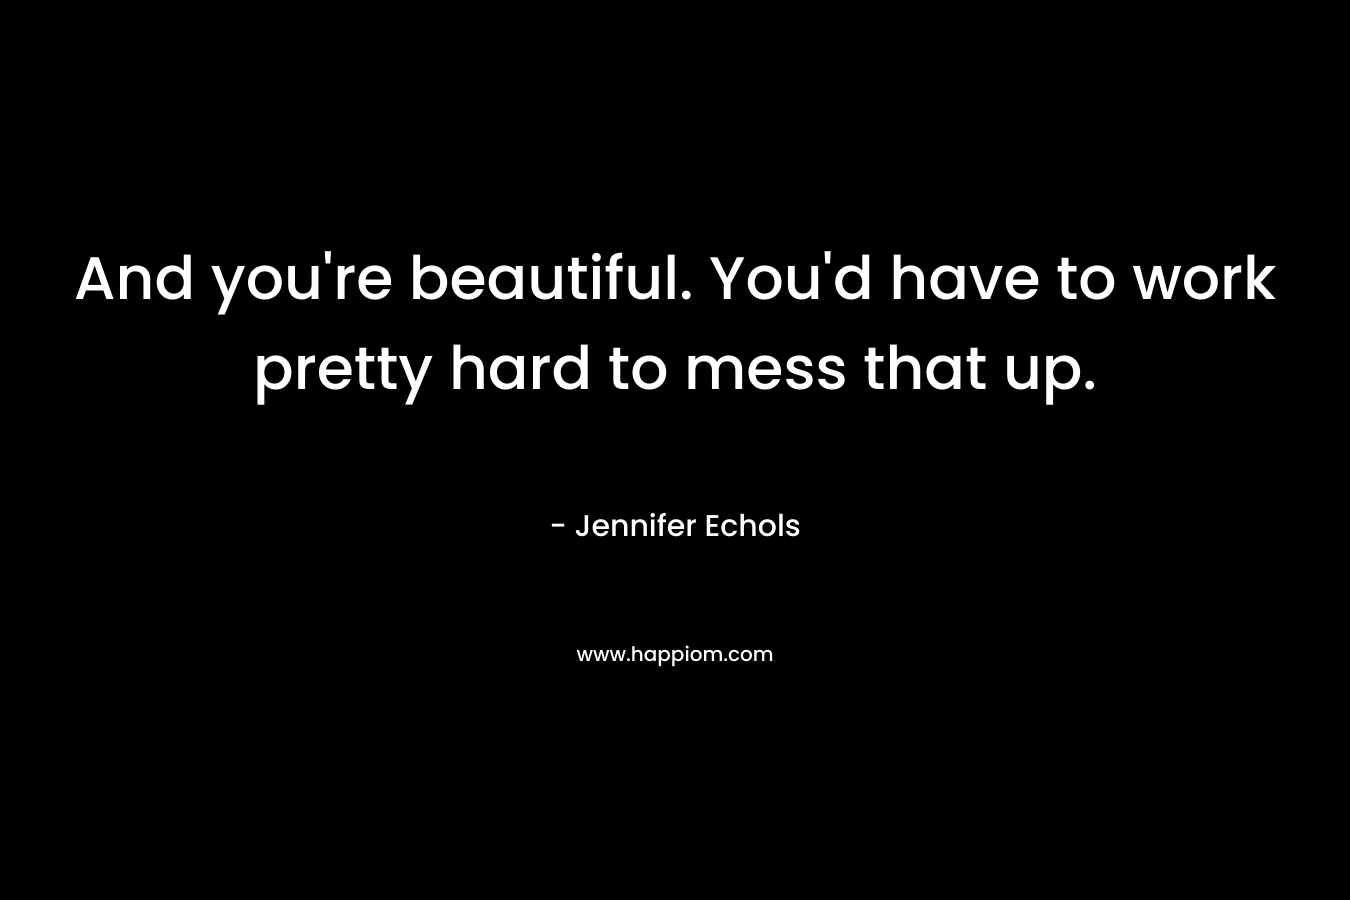 And you’re beautiful. You’d have to work pretty hard to mess that up. – Jennifer Echols